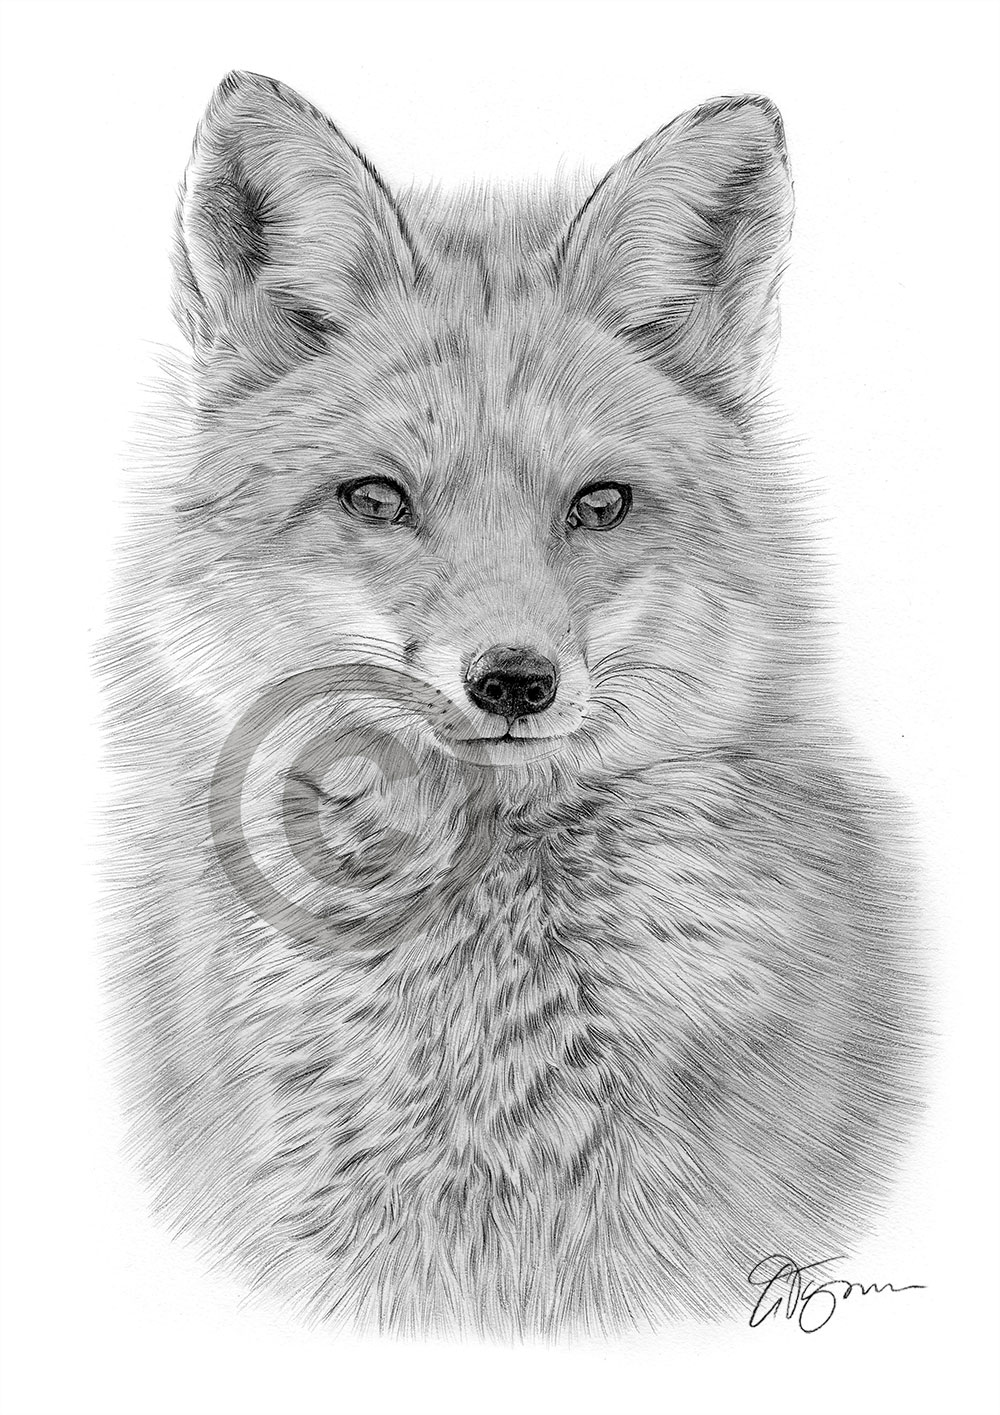 Pencil drawing of a red fox by artist Gary Tymon